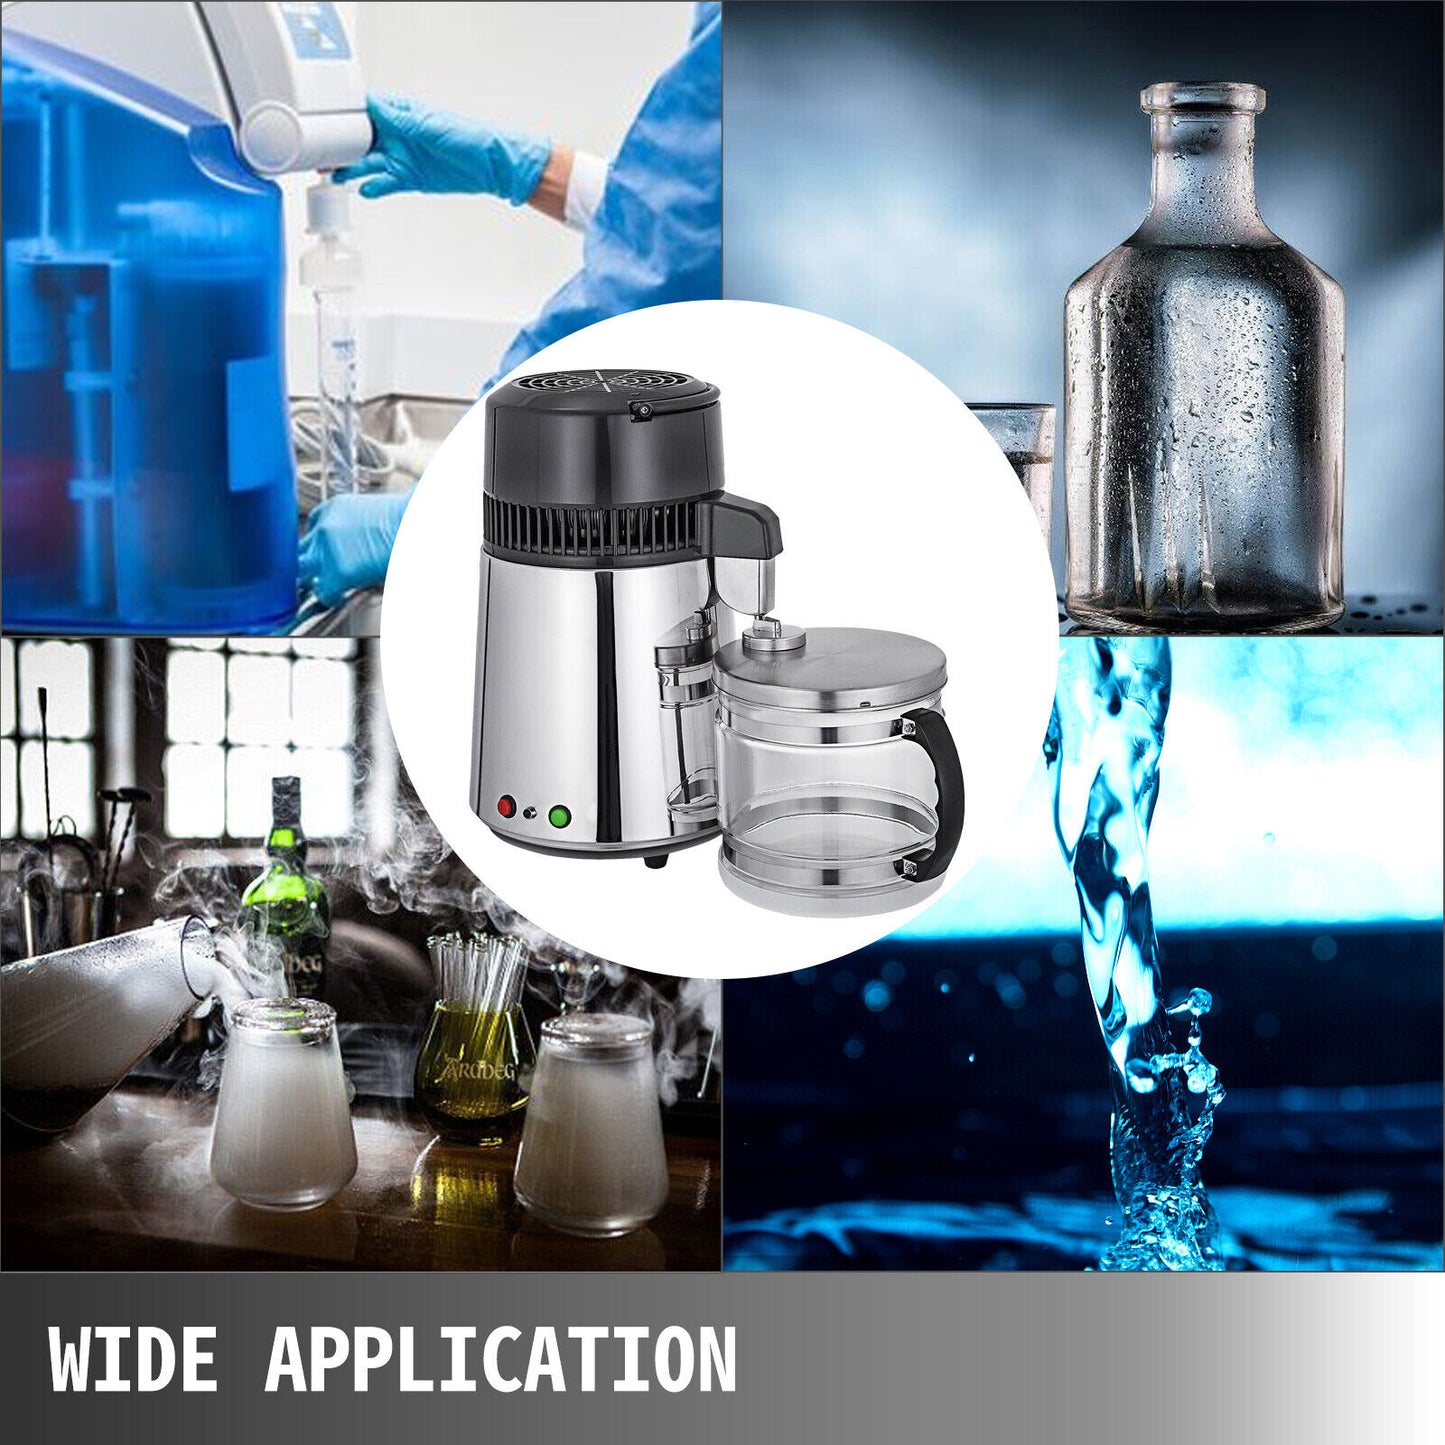 Pure and Refreshing: VEVOR 4L Water Distiller for Distilled Water Purification in Dental and Home Settings